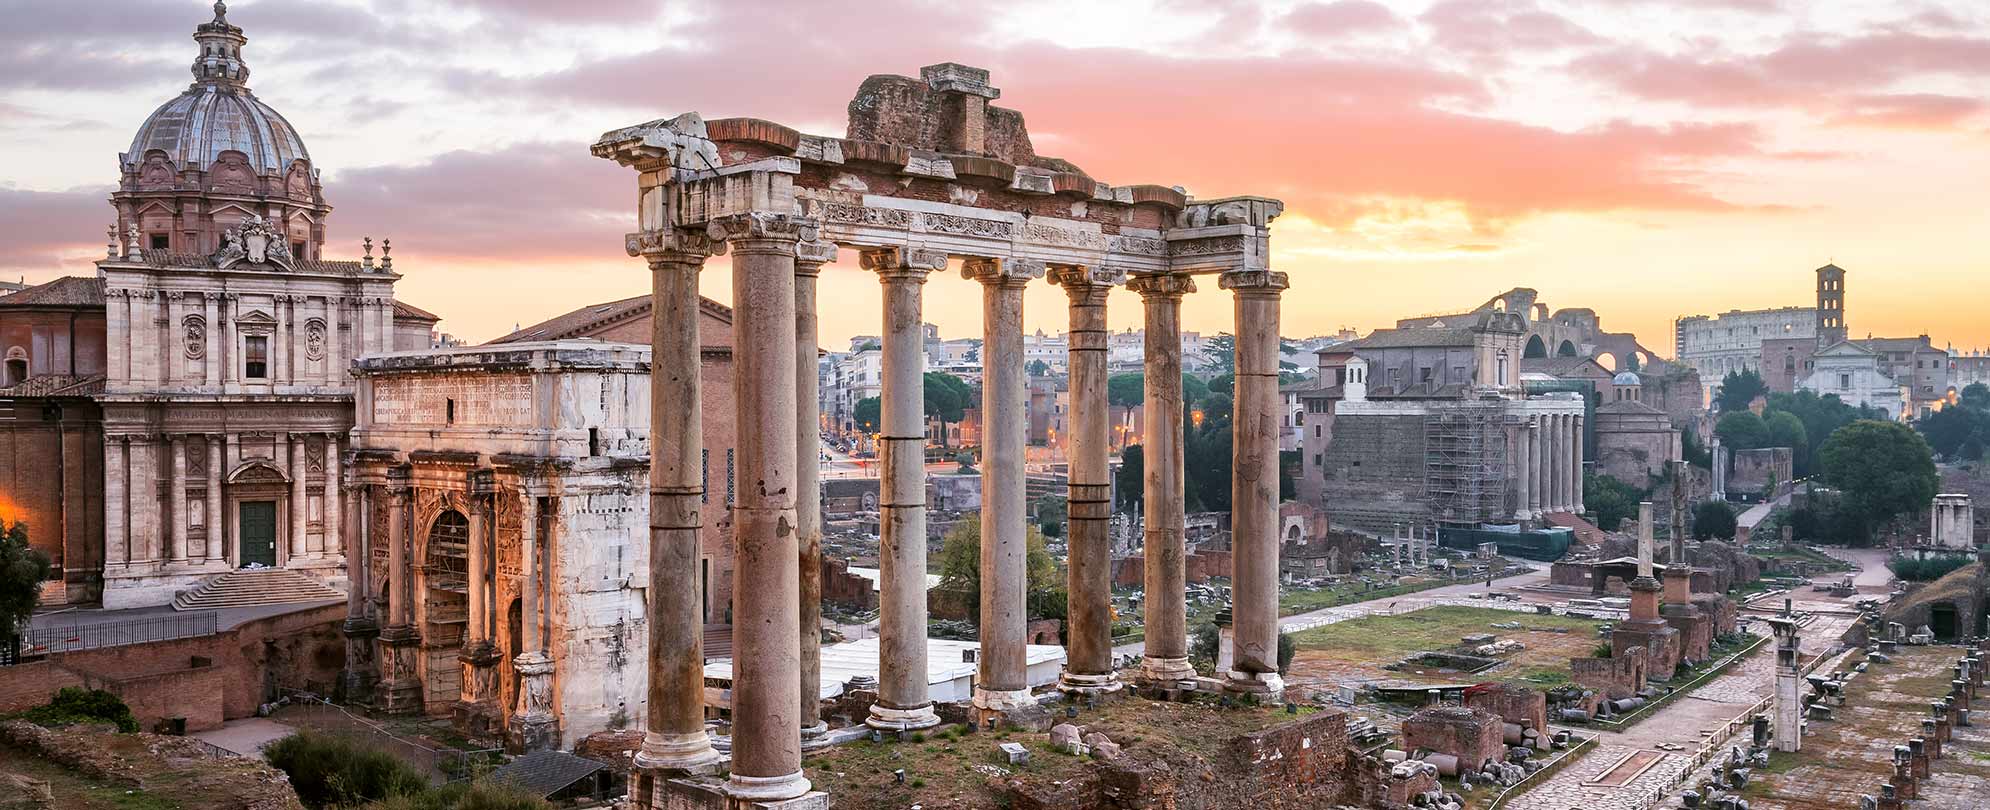 Columns and ruins at the Roman Forum in Rome, Italy. 